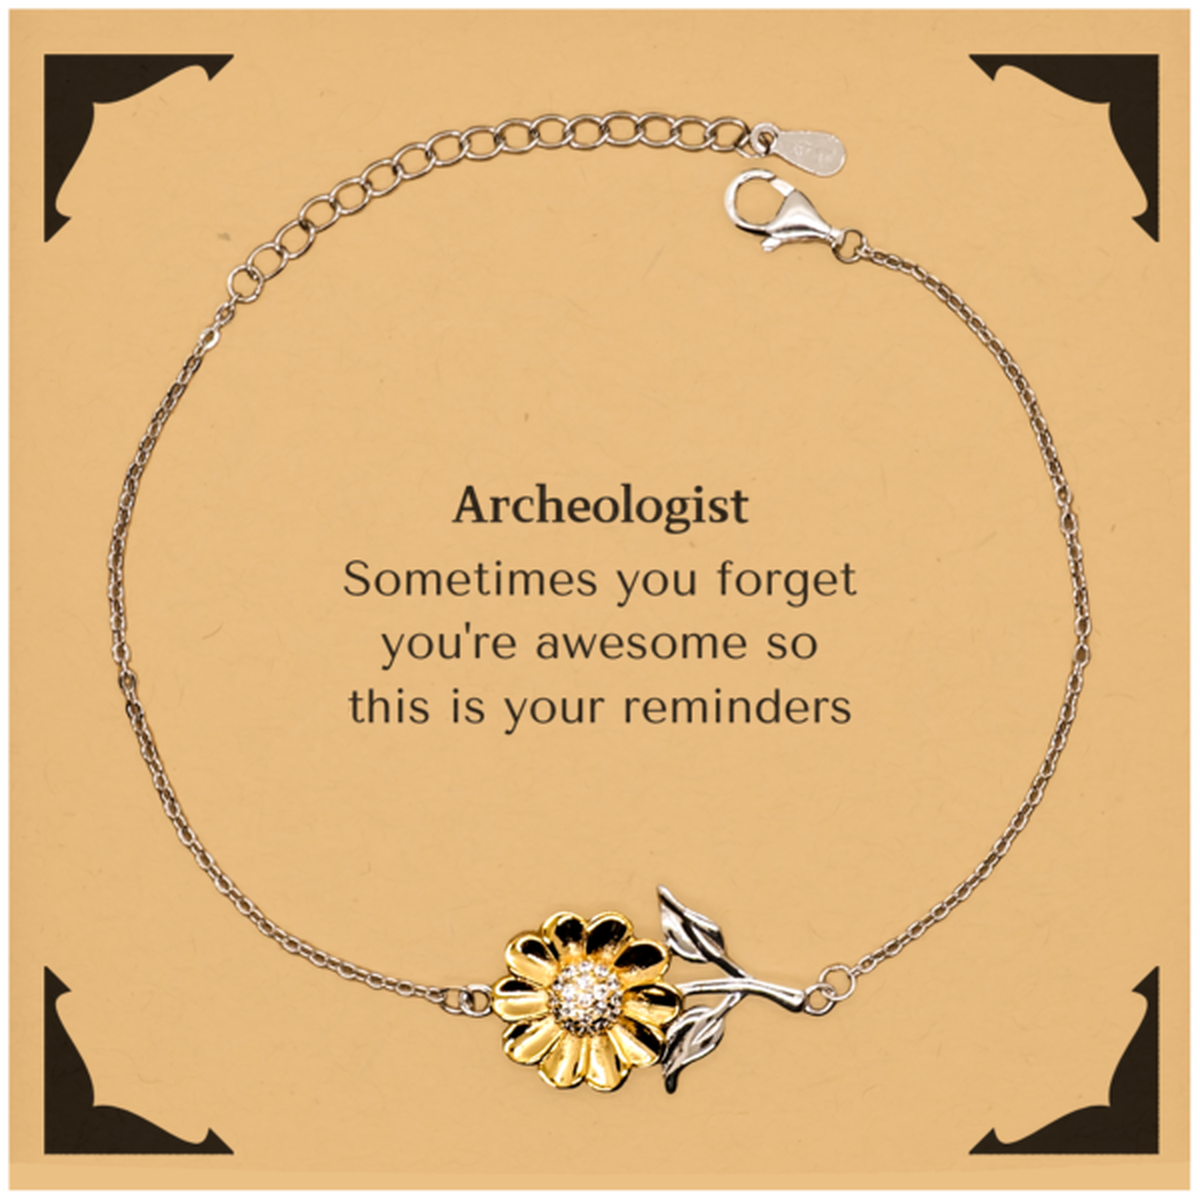 Sentimental Archeologist Sunflower Bracelet, Archeologist Sometimes you forget you're awesome so this is your reminders, Graduation Christmas Birthday Gifts for Archeologist, Men, Women, Coworkers